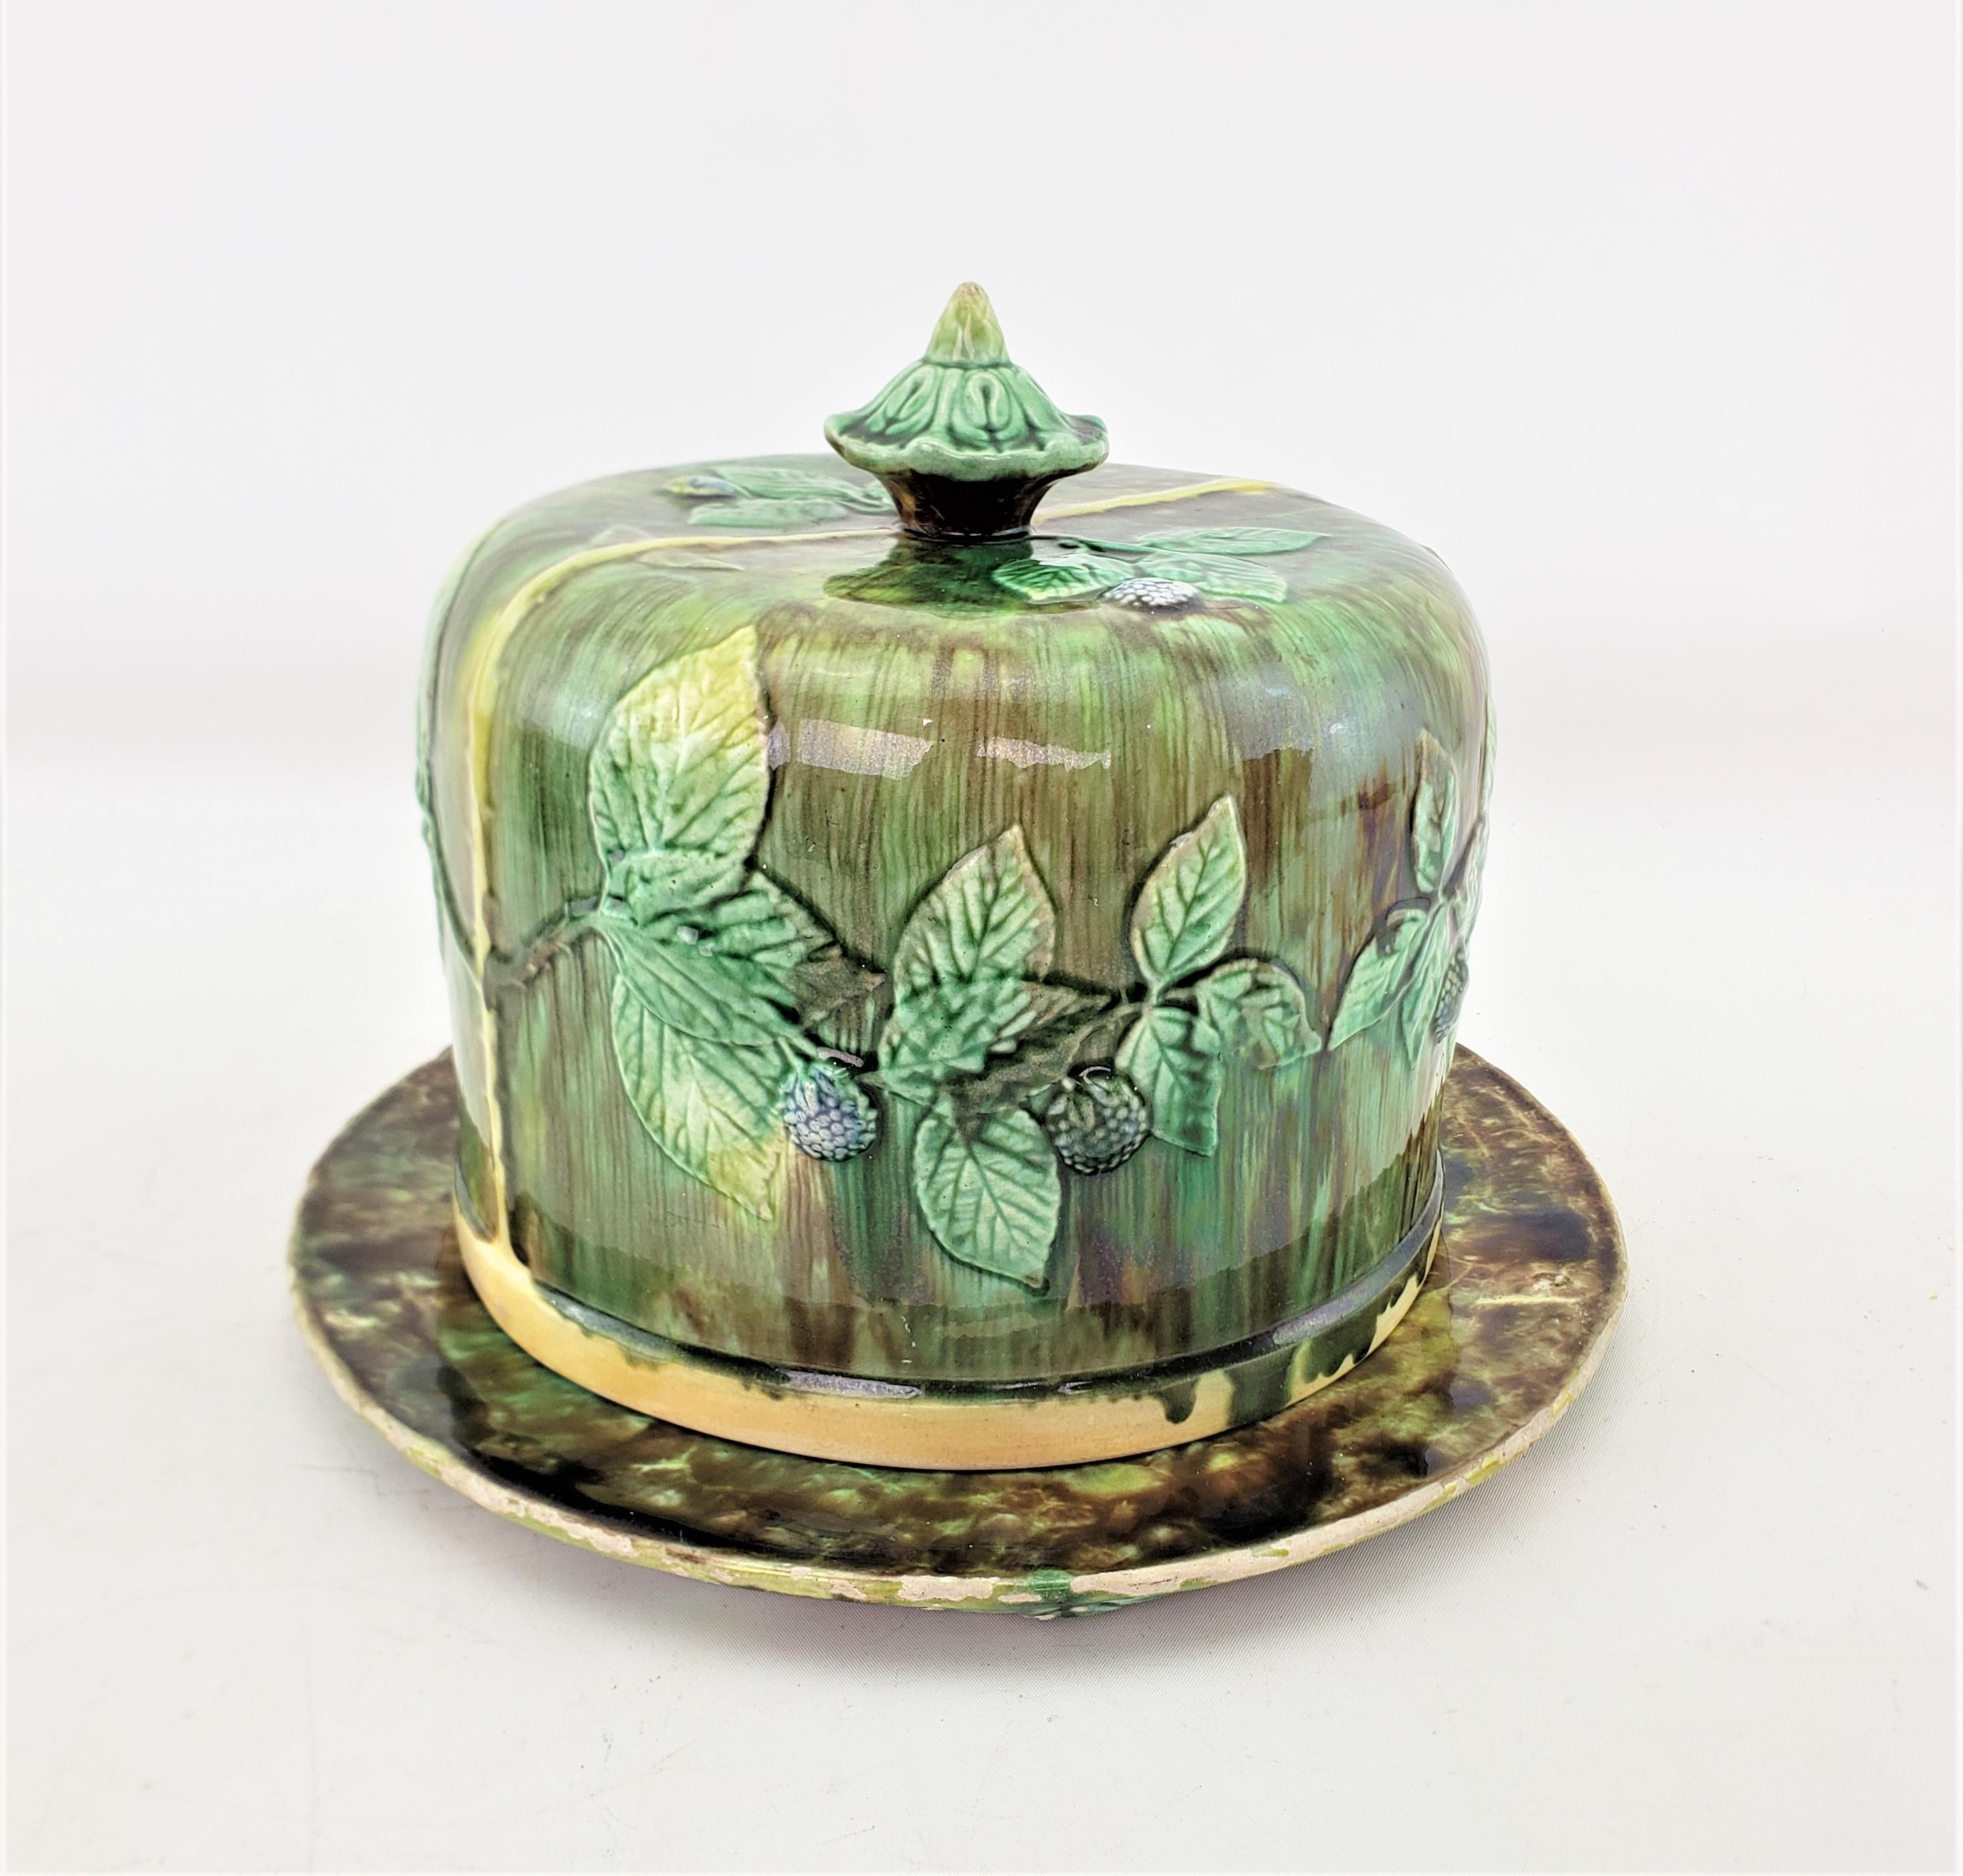 Victorian Large Antique Majolica Covered Cheese Server or Dome with Leaf & Berry Decor For Sale